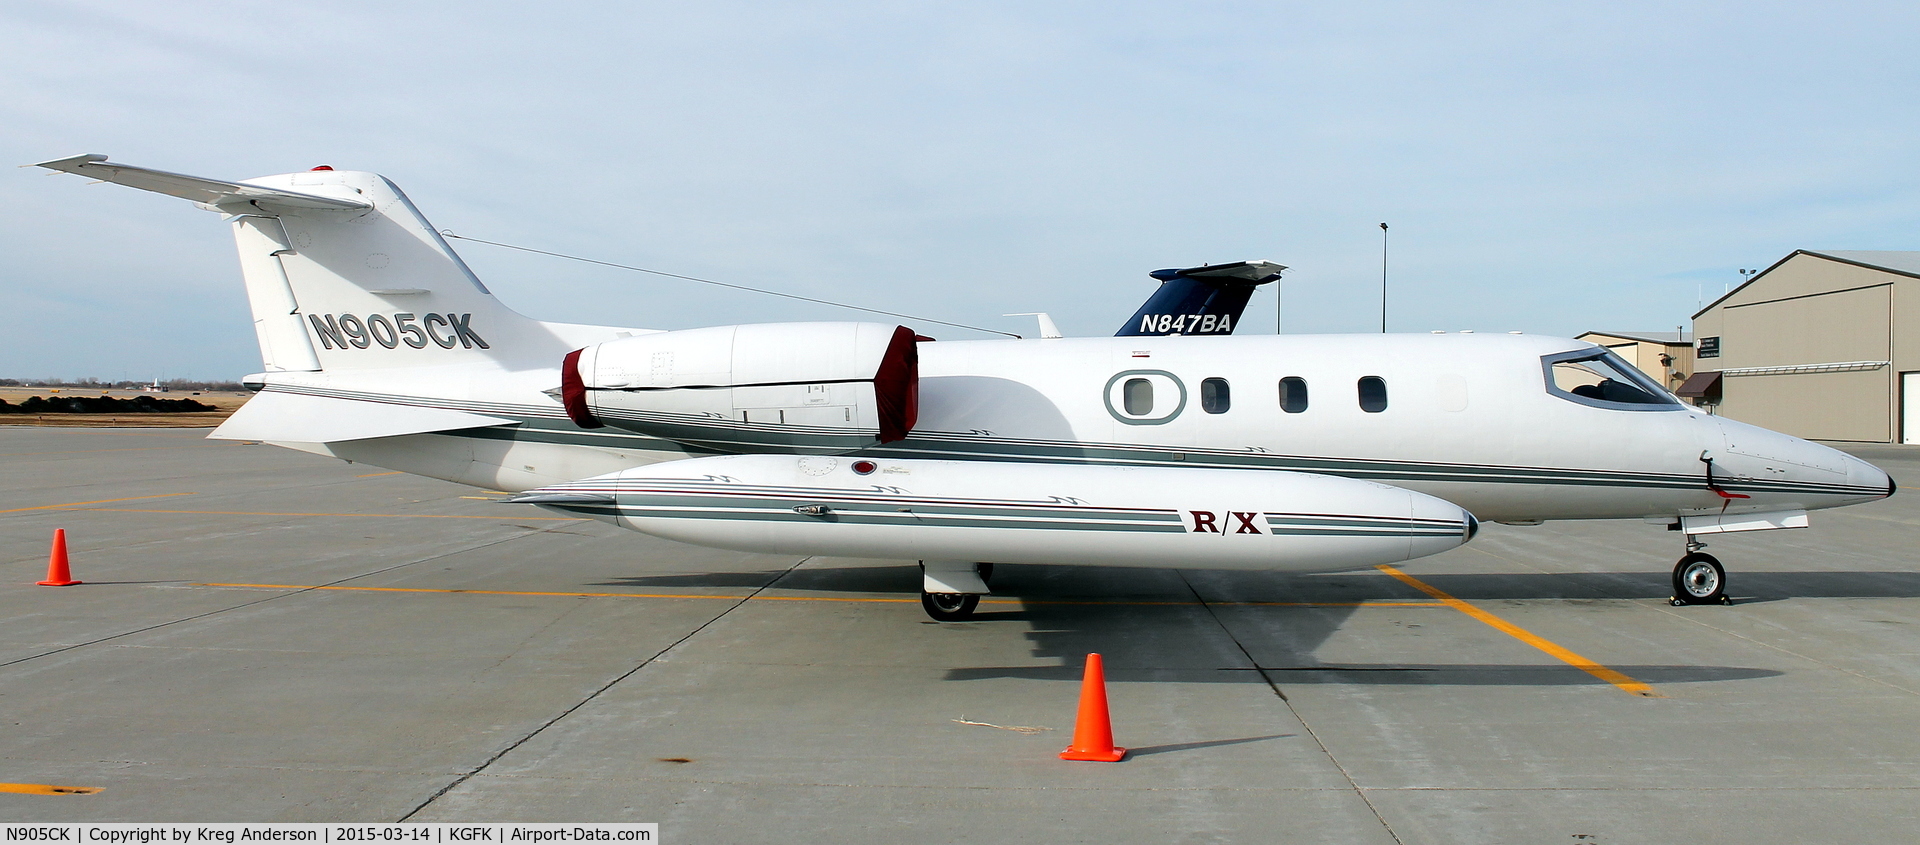 N905CK, 1975 Gates Learjet 36 C/N 005, Lear Jet 36 on the ramp in Grand Forks, ND.